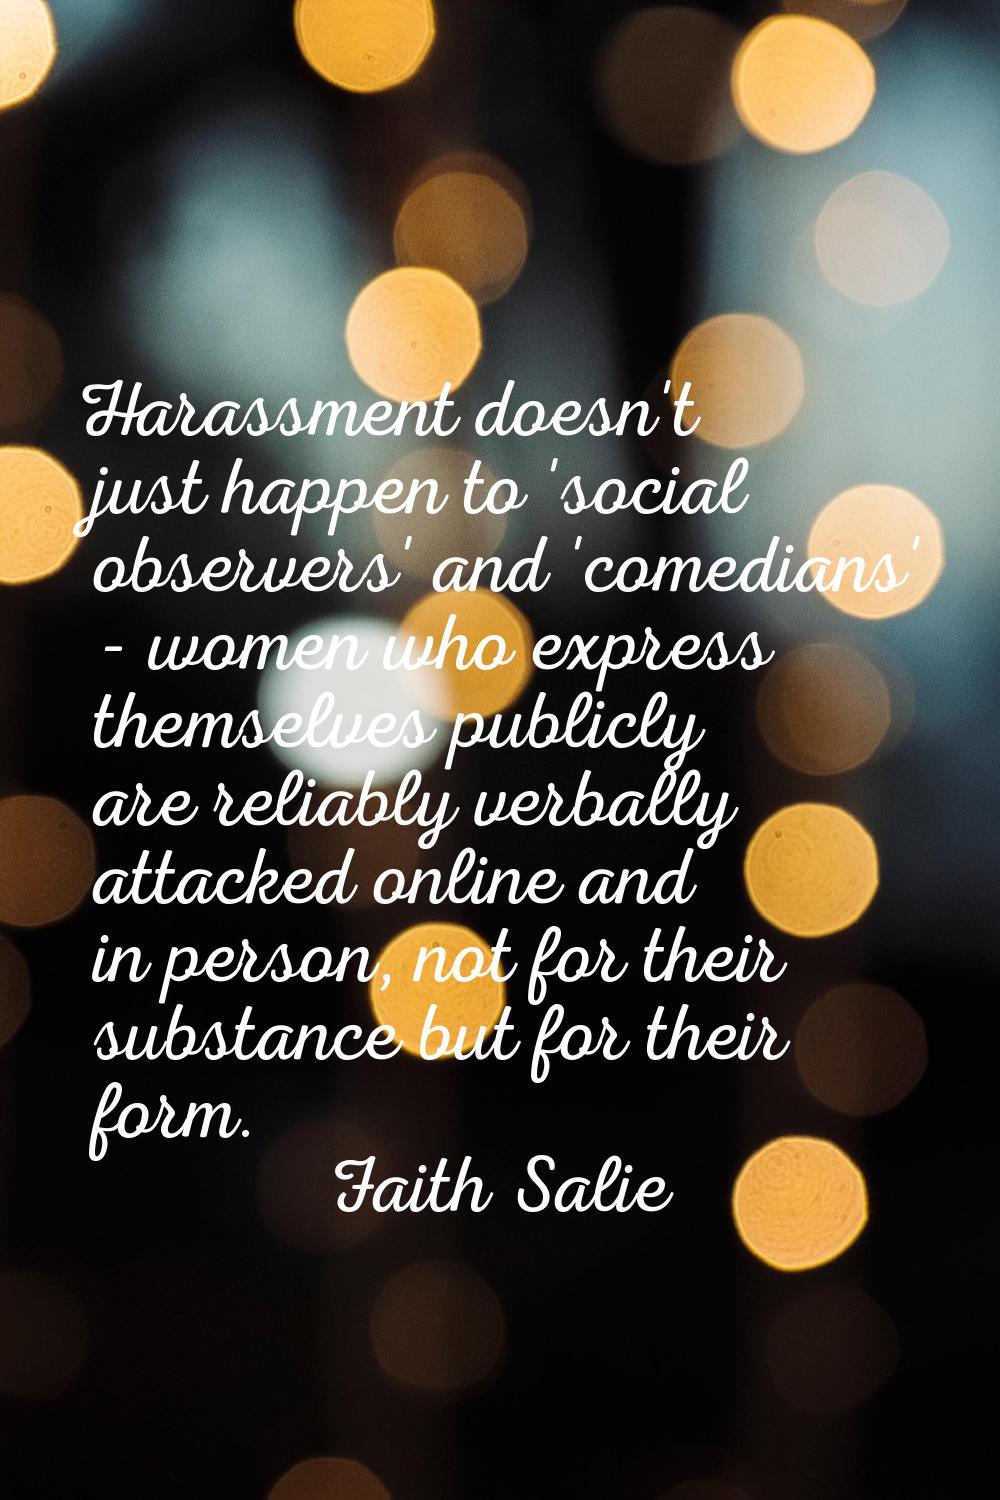 Harassment doesn't just happen to 'social observers' and 'comedians' - women who express themselves